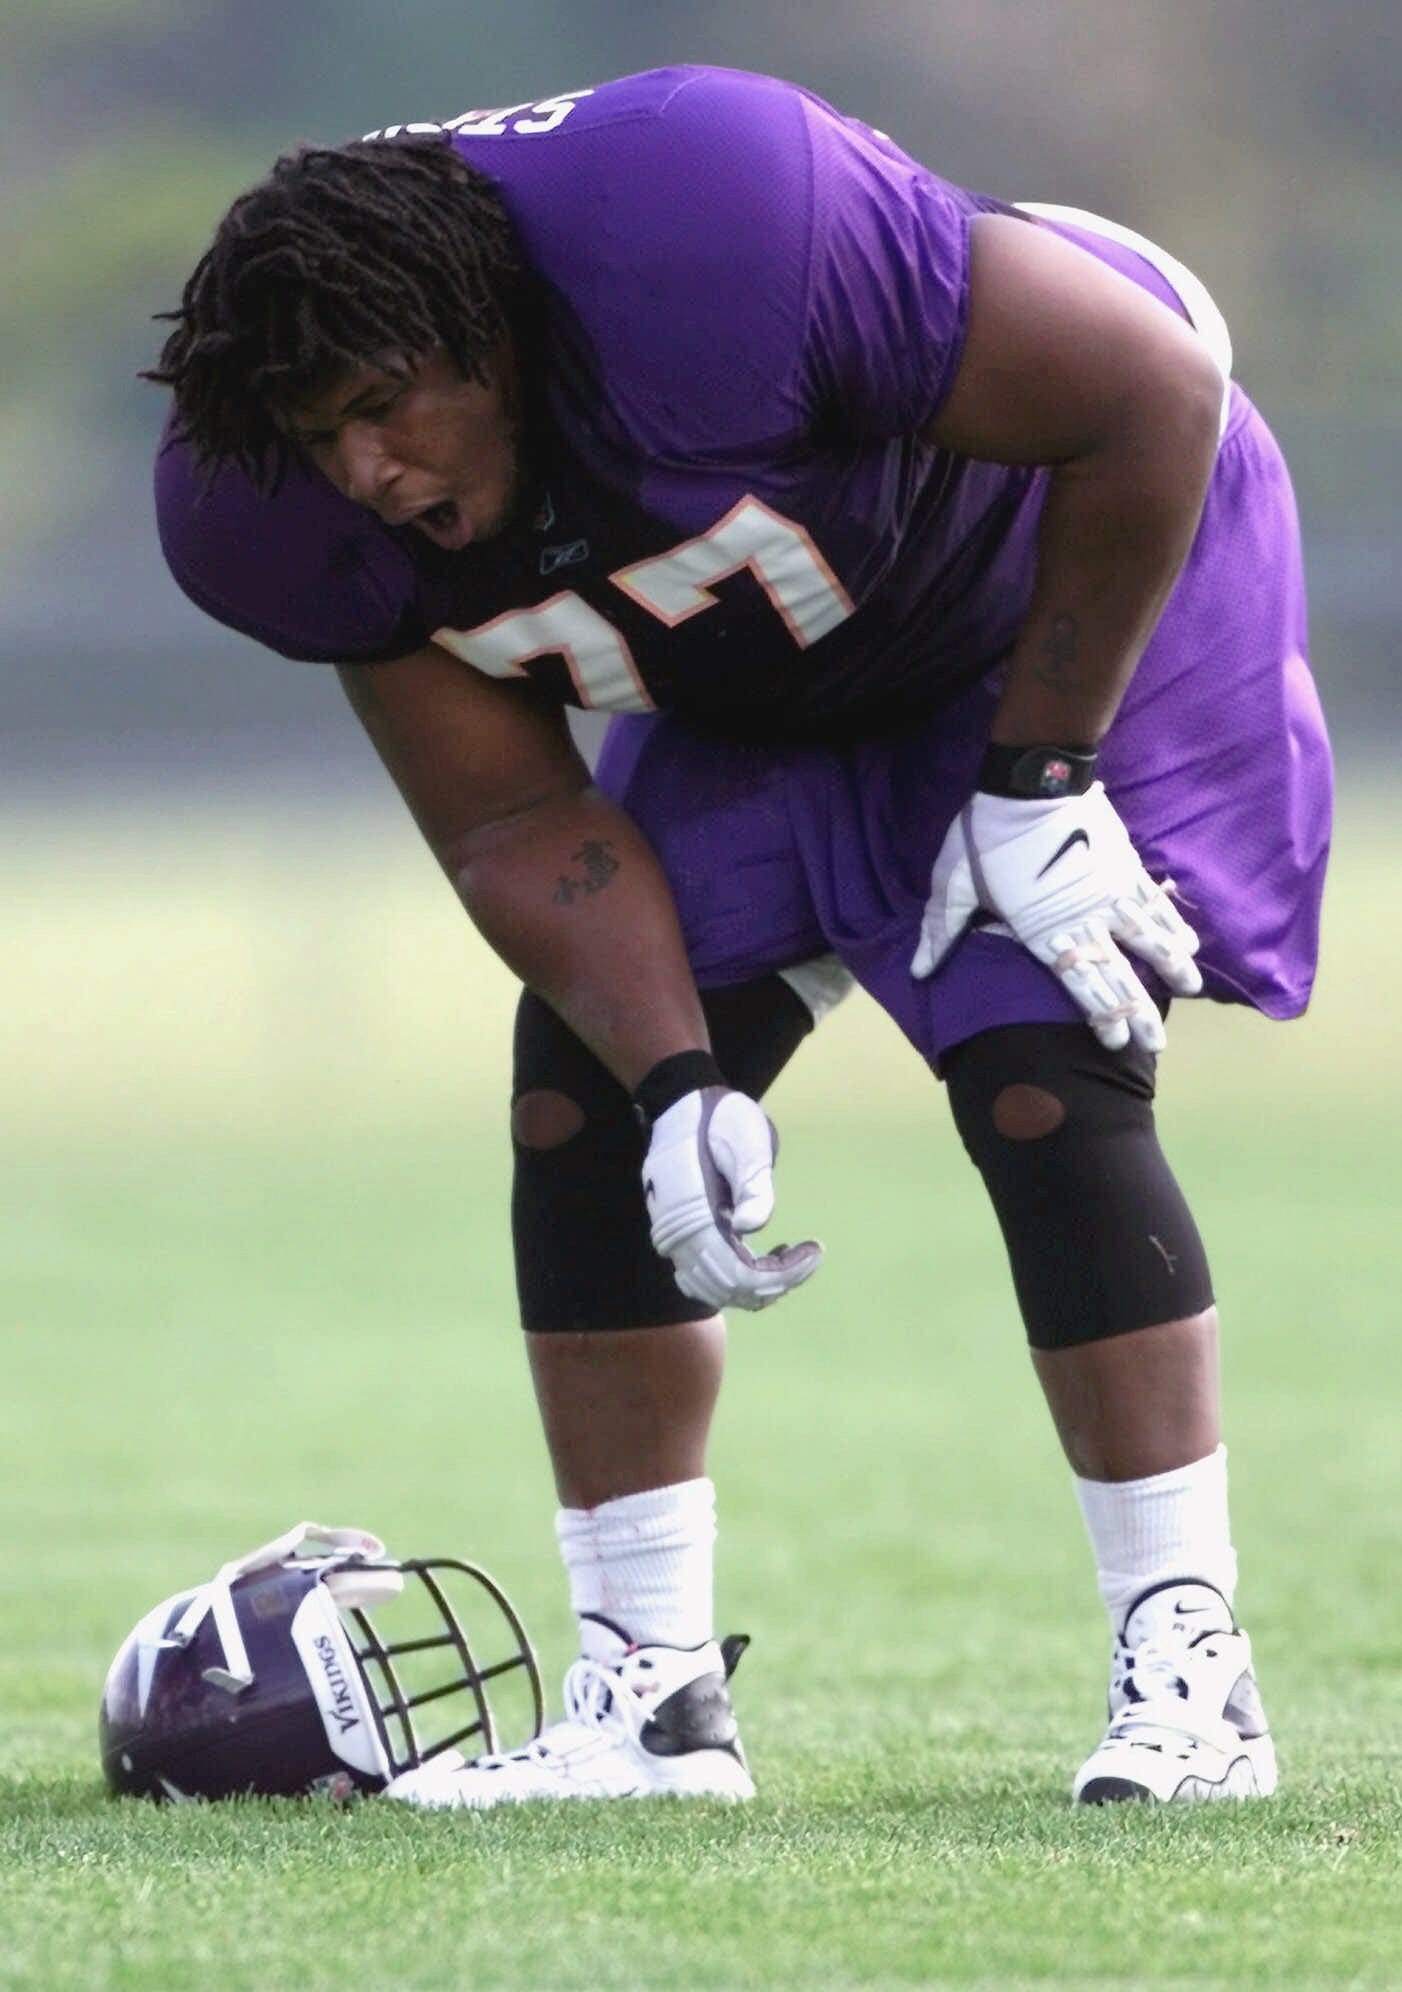 Minnesota Viking Korey Stringer, 27, gasps for air during a late July 2001 practice. Stringer collapsed during the next day's practice and died soon after from the effects of heat stroke.